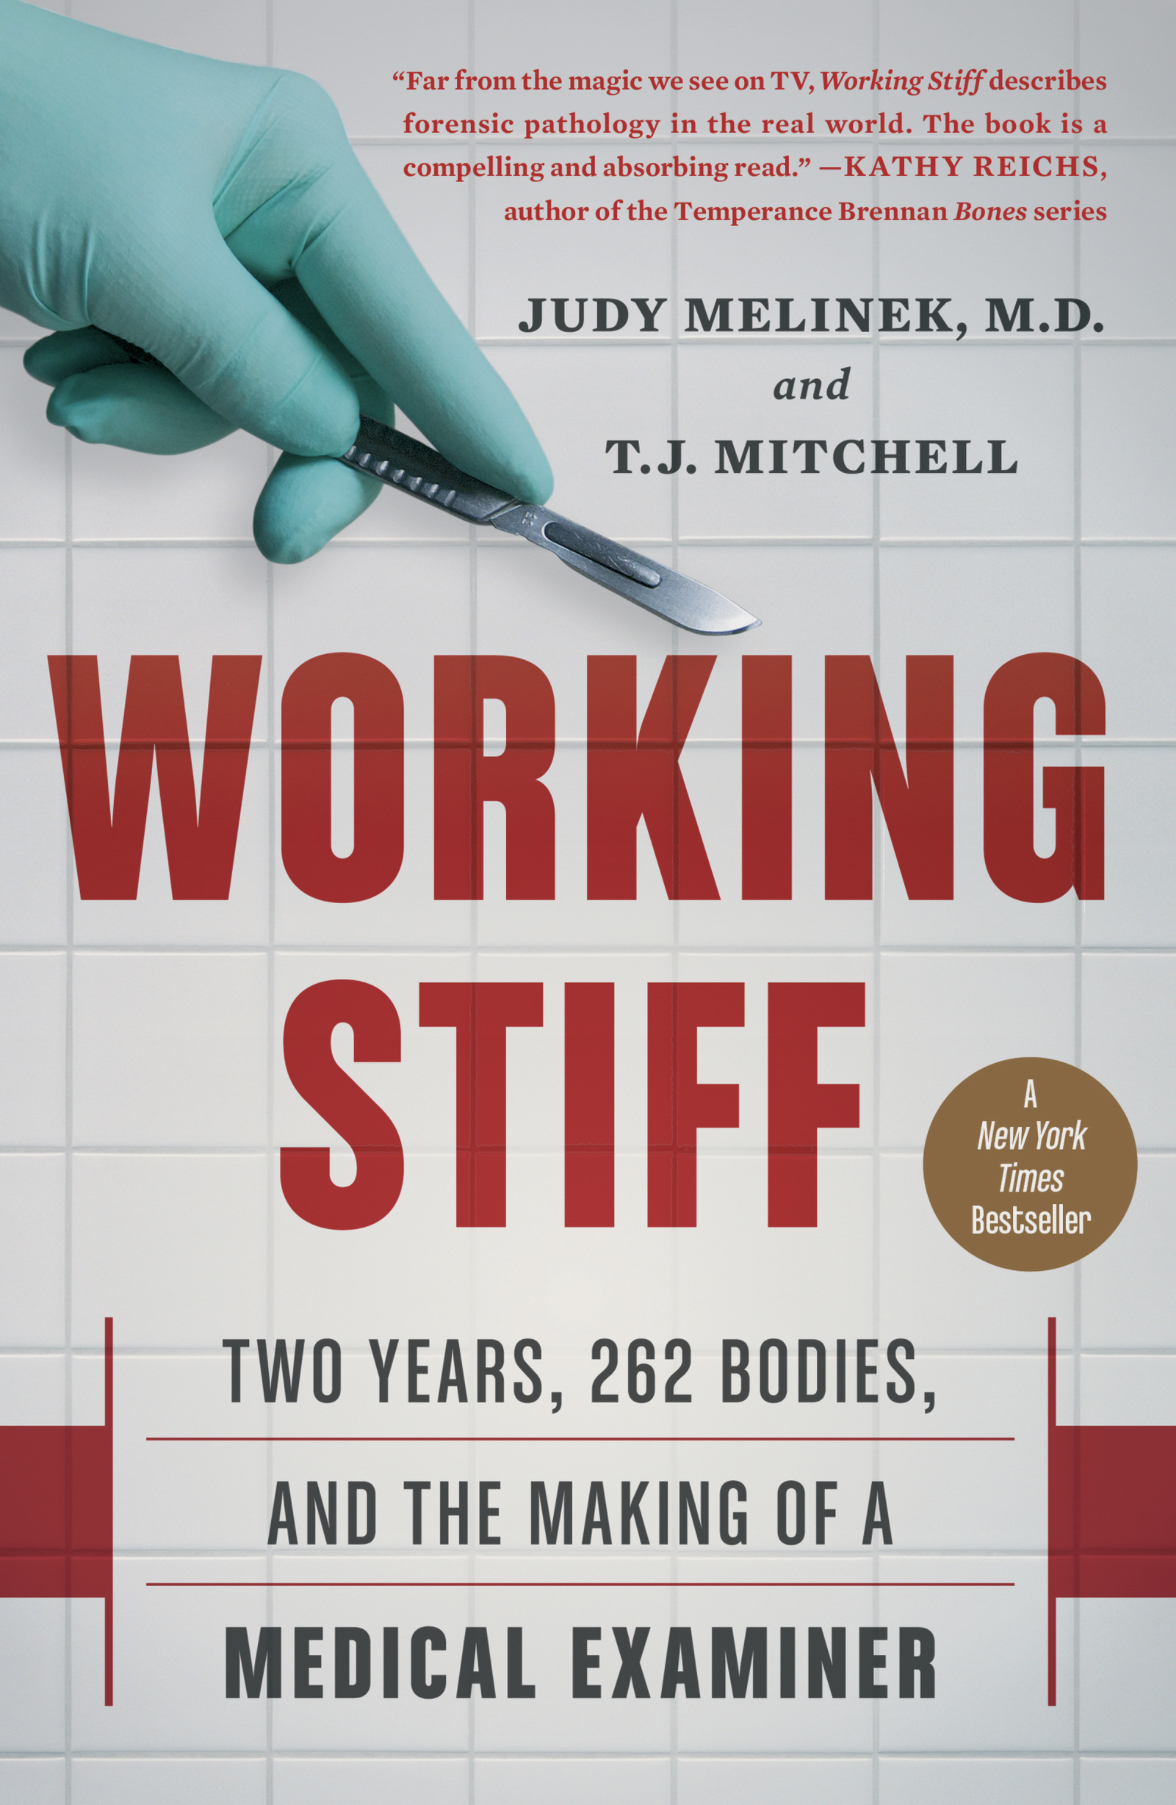 Working stiff : two years, 262 bodies, and the making of a medical examiner